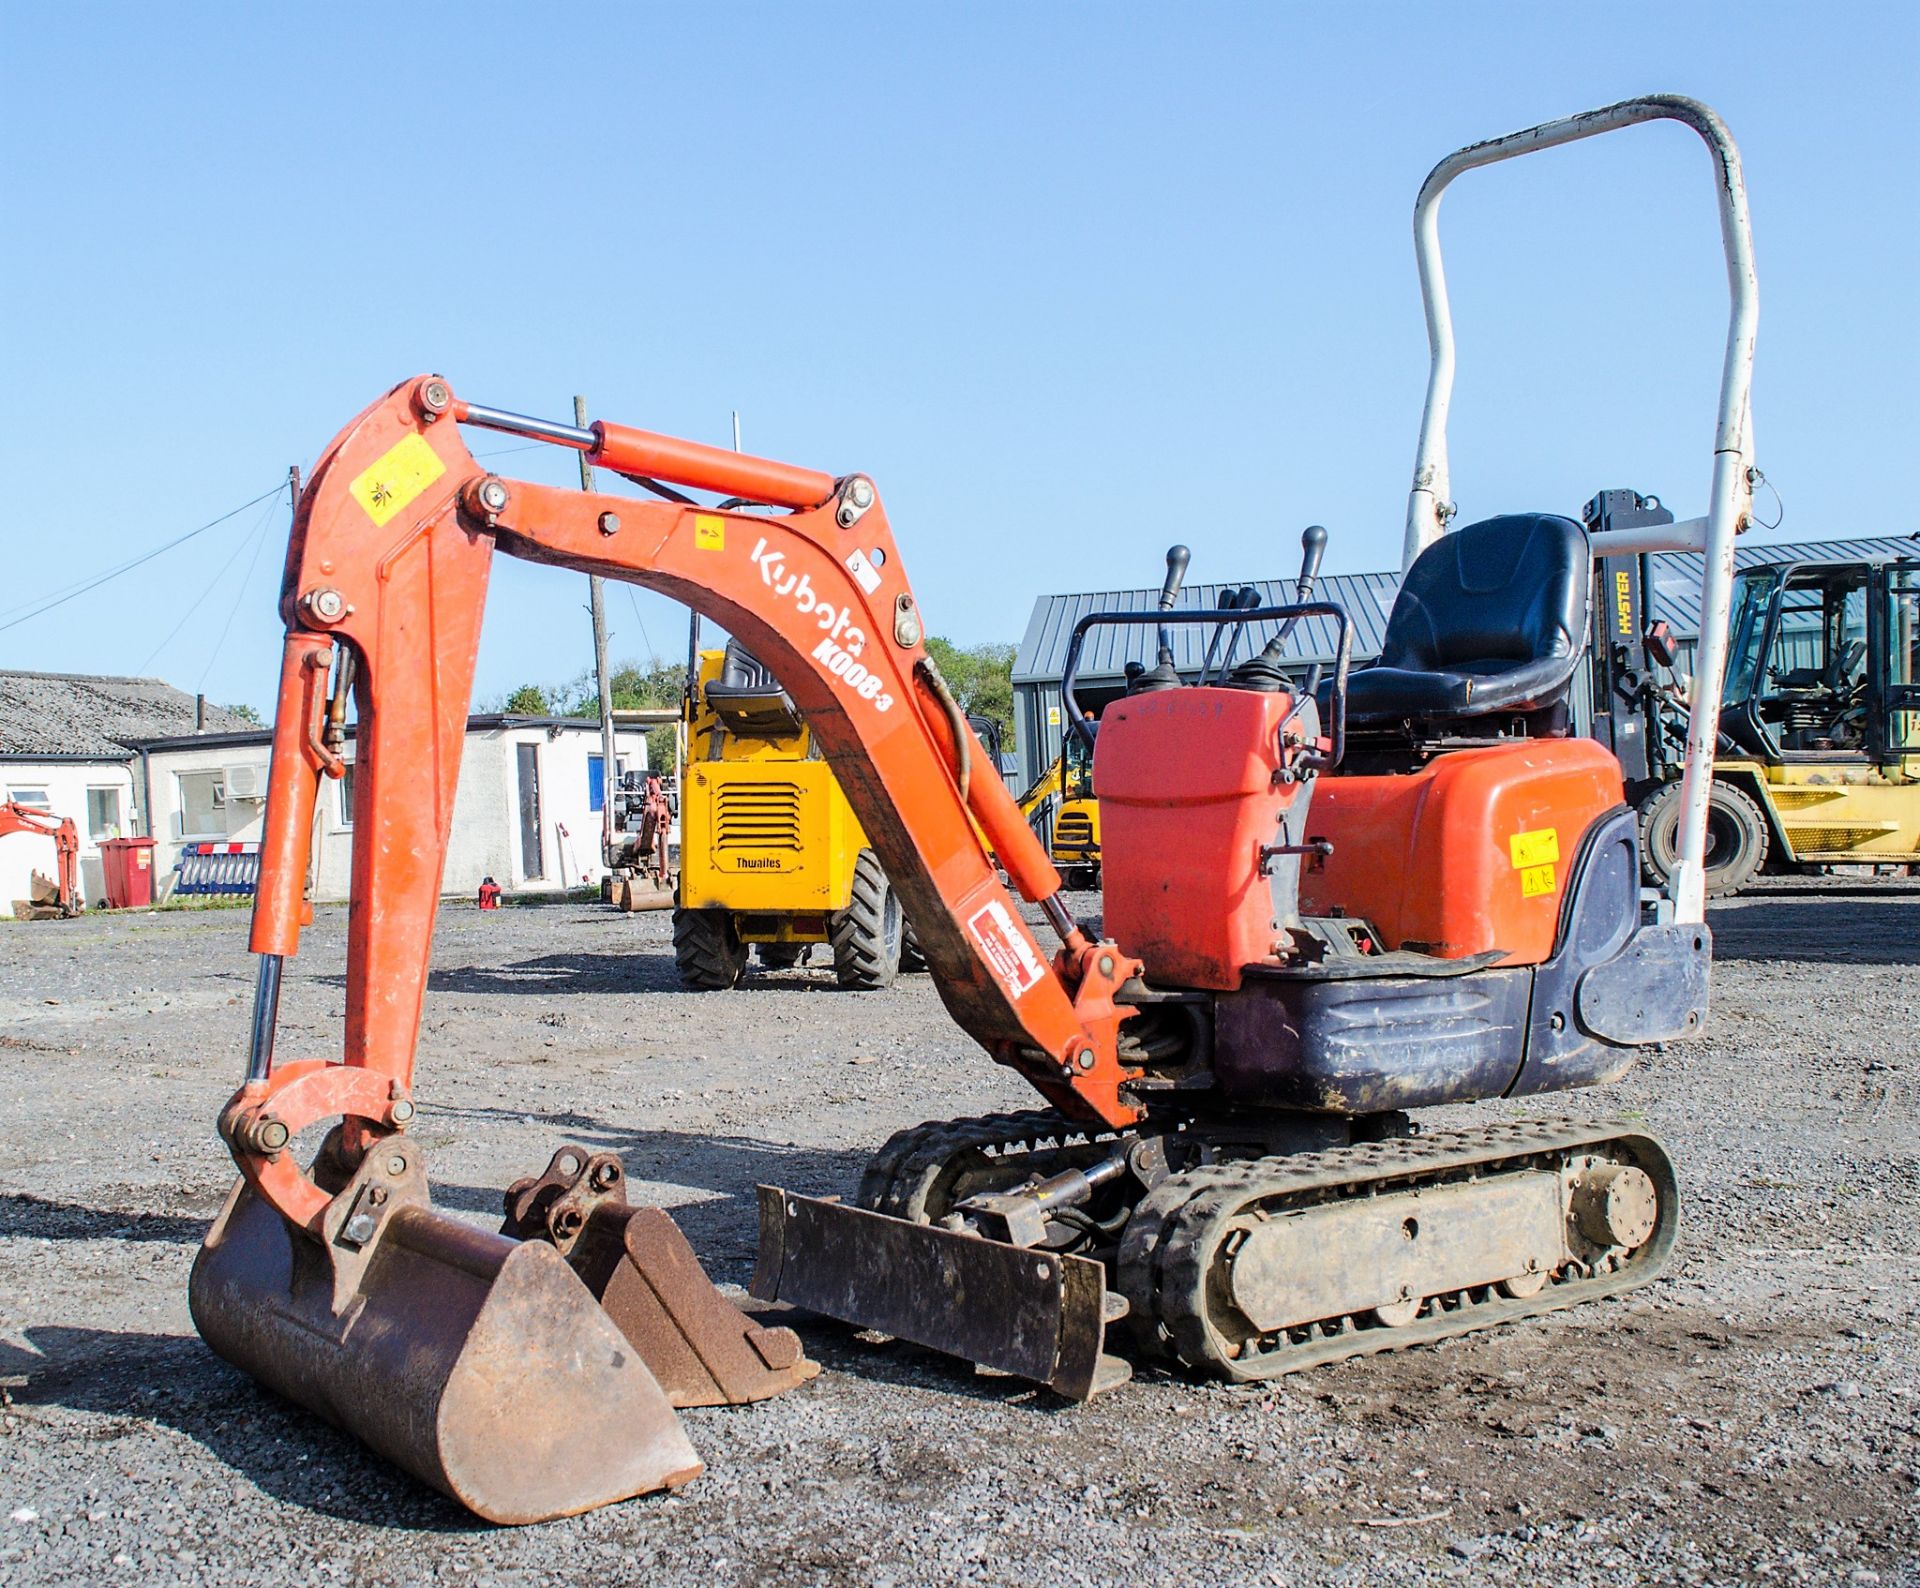 Kubota KX008-3 0.8 tonne rubber tracked micro excavator Year: 2006 S/N: 13422 Recorded Hours: 1607